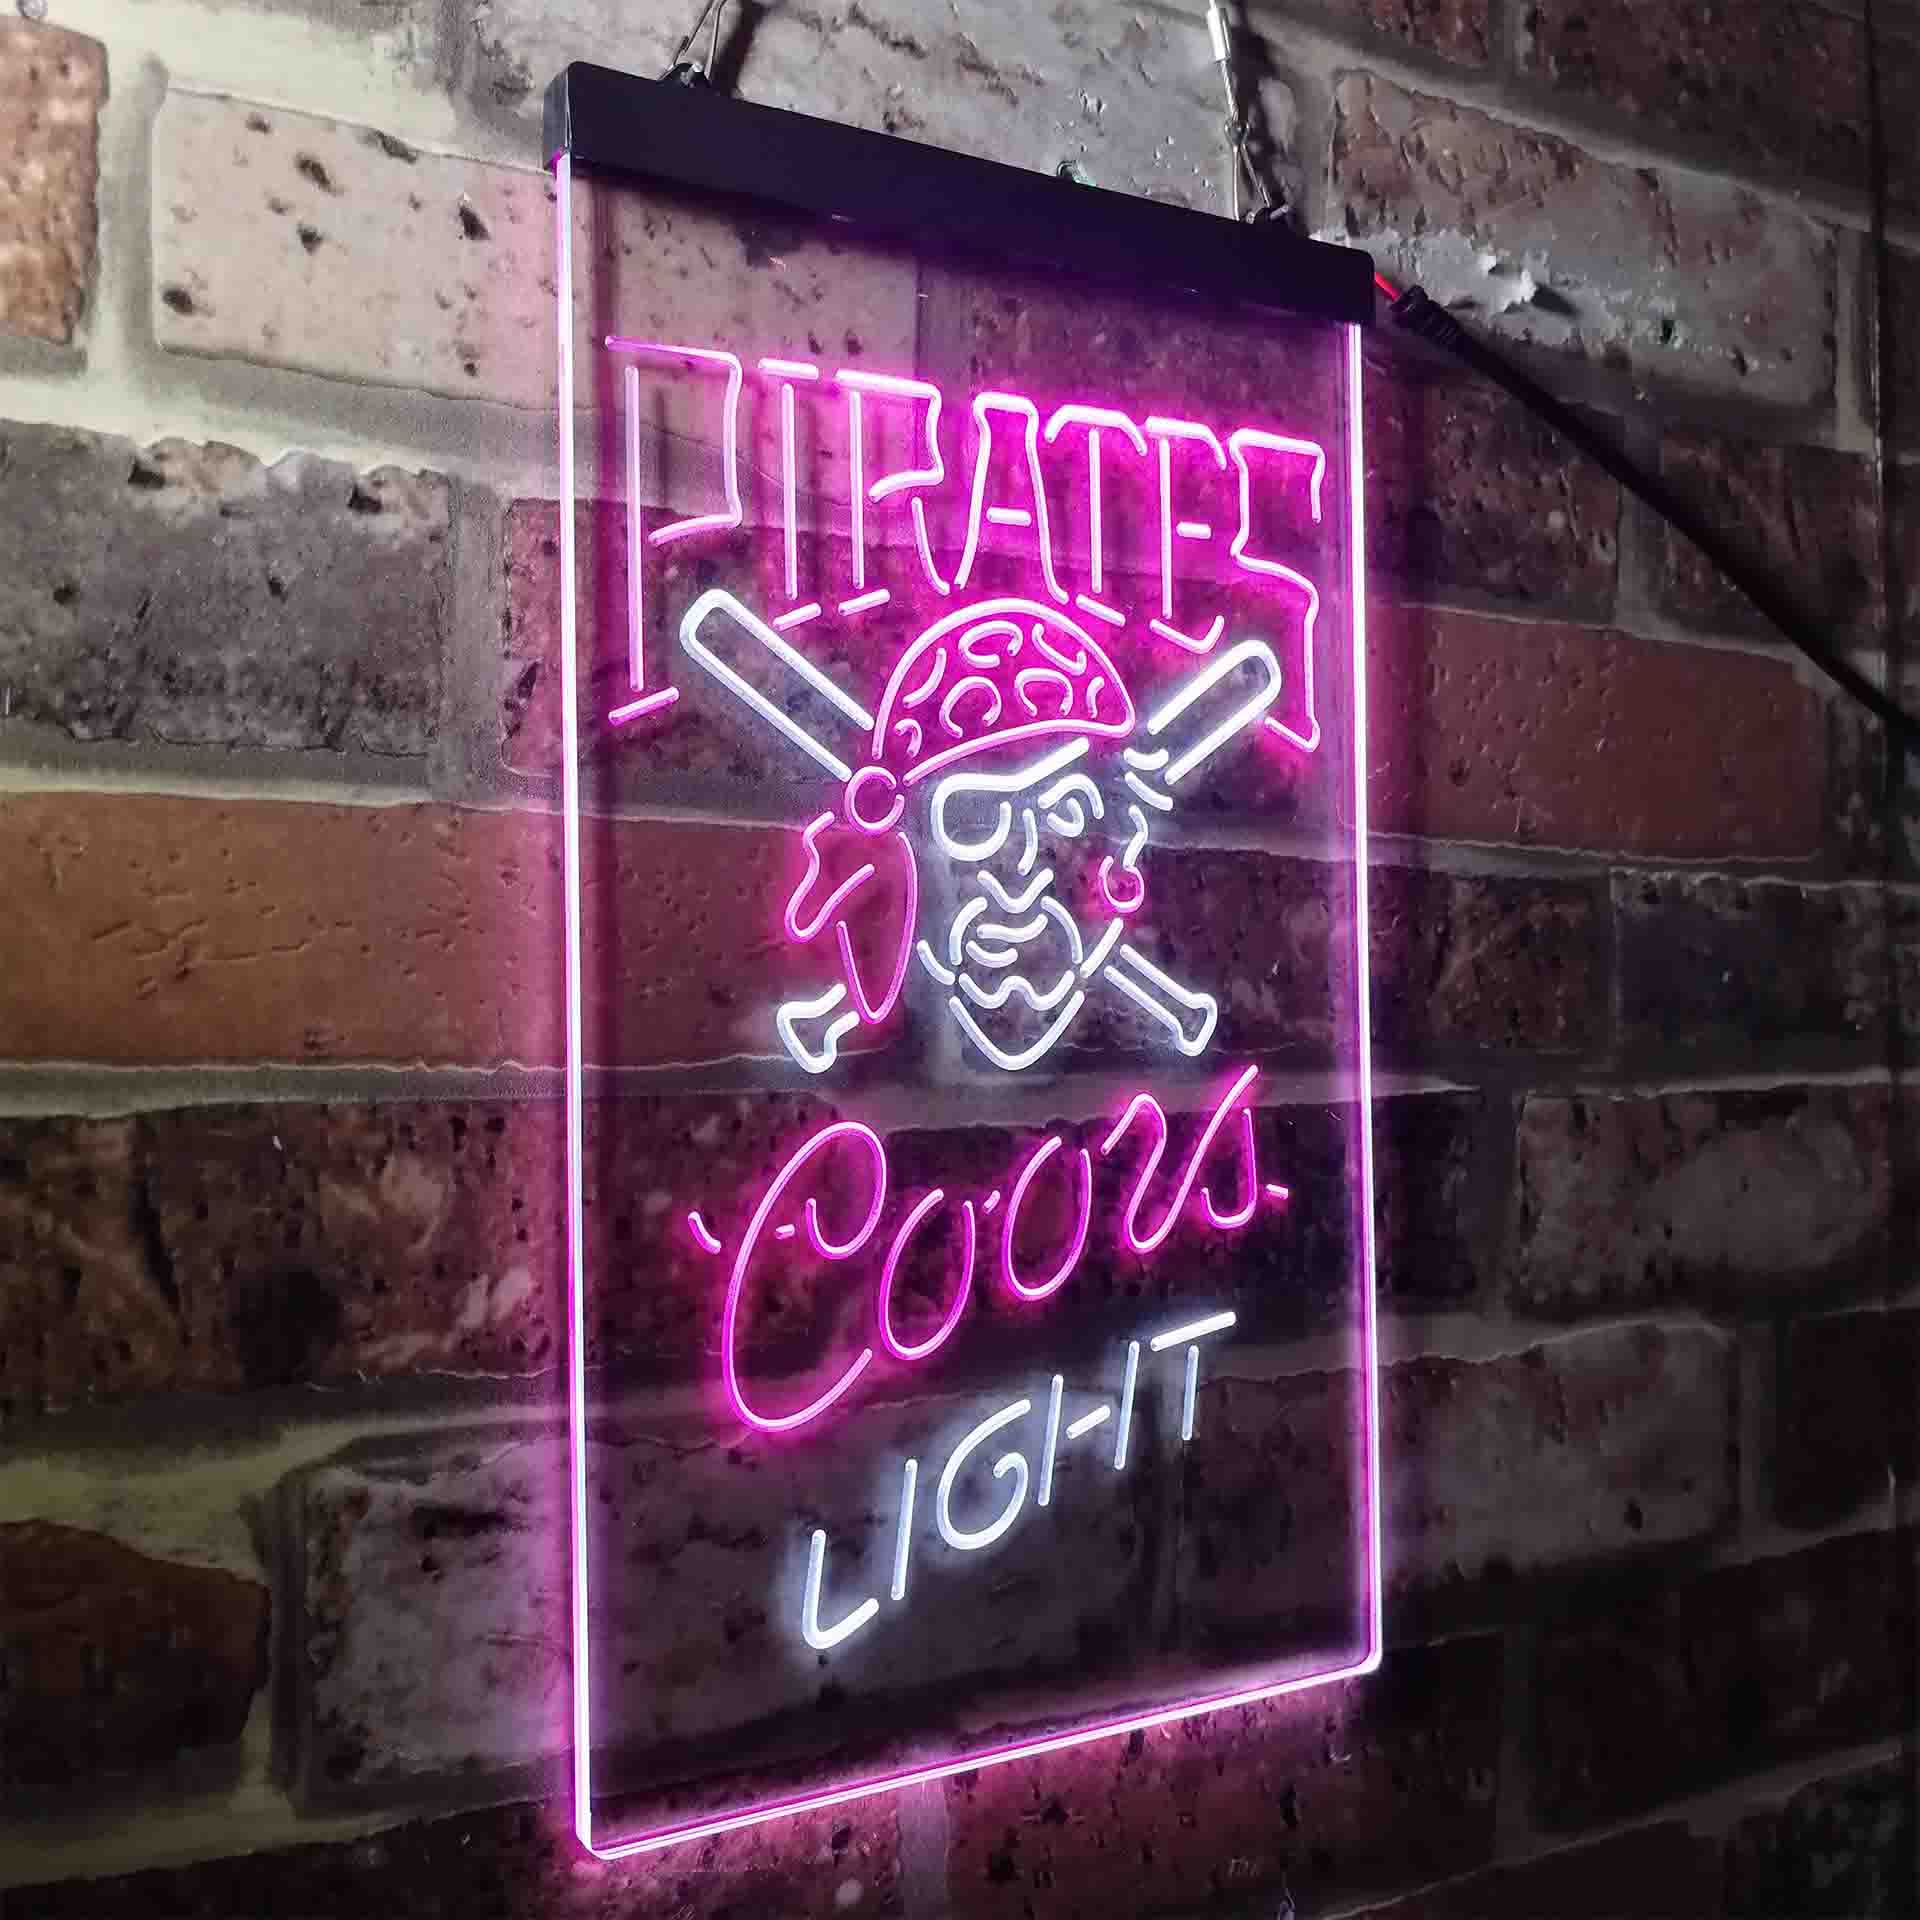 Pittsburgh Pirates Coors Light Neon-Like LED Sign